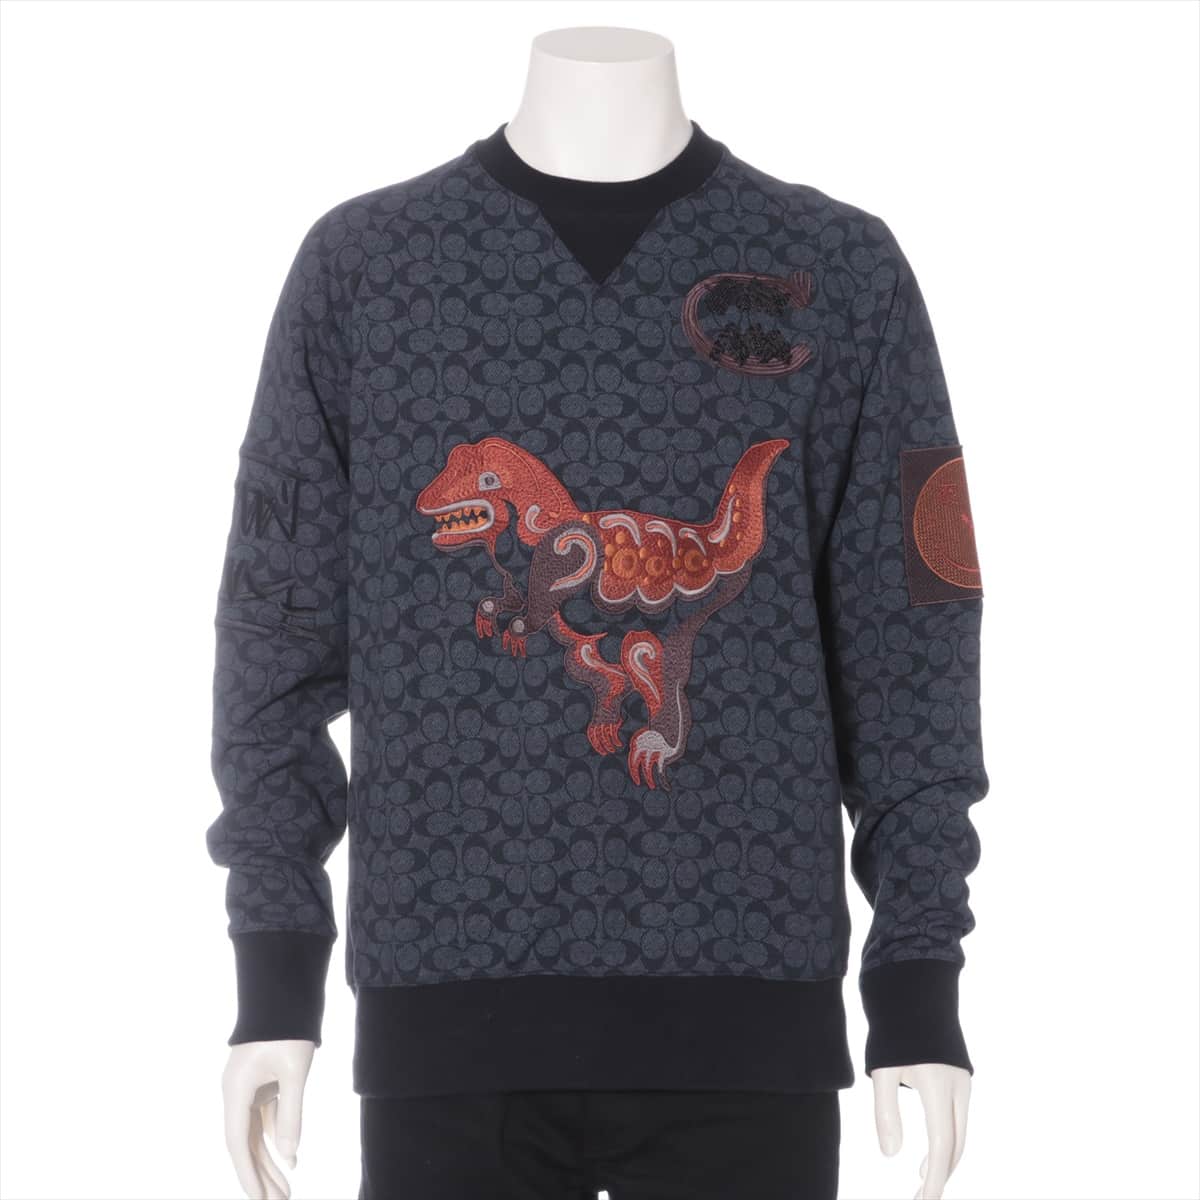 COACH Cotton & nylon Basic knitted fabric S Men's Grey  dinosaurs One side of the tag is cut off